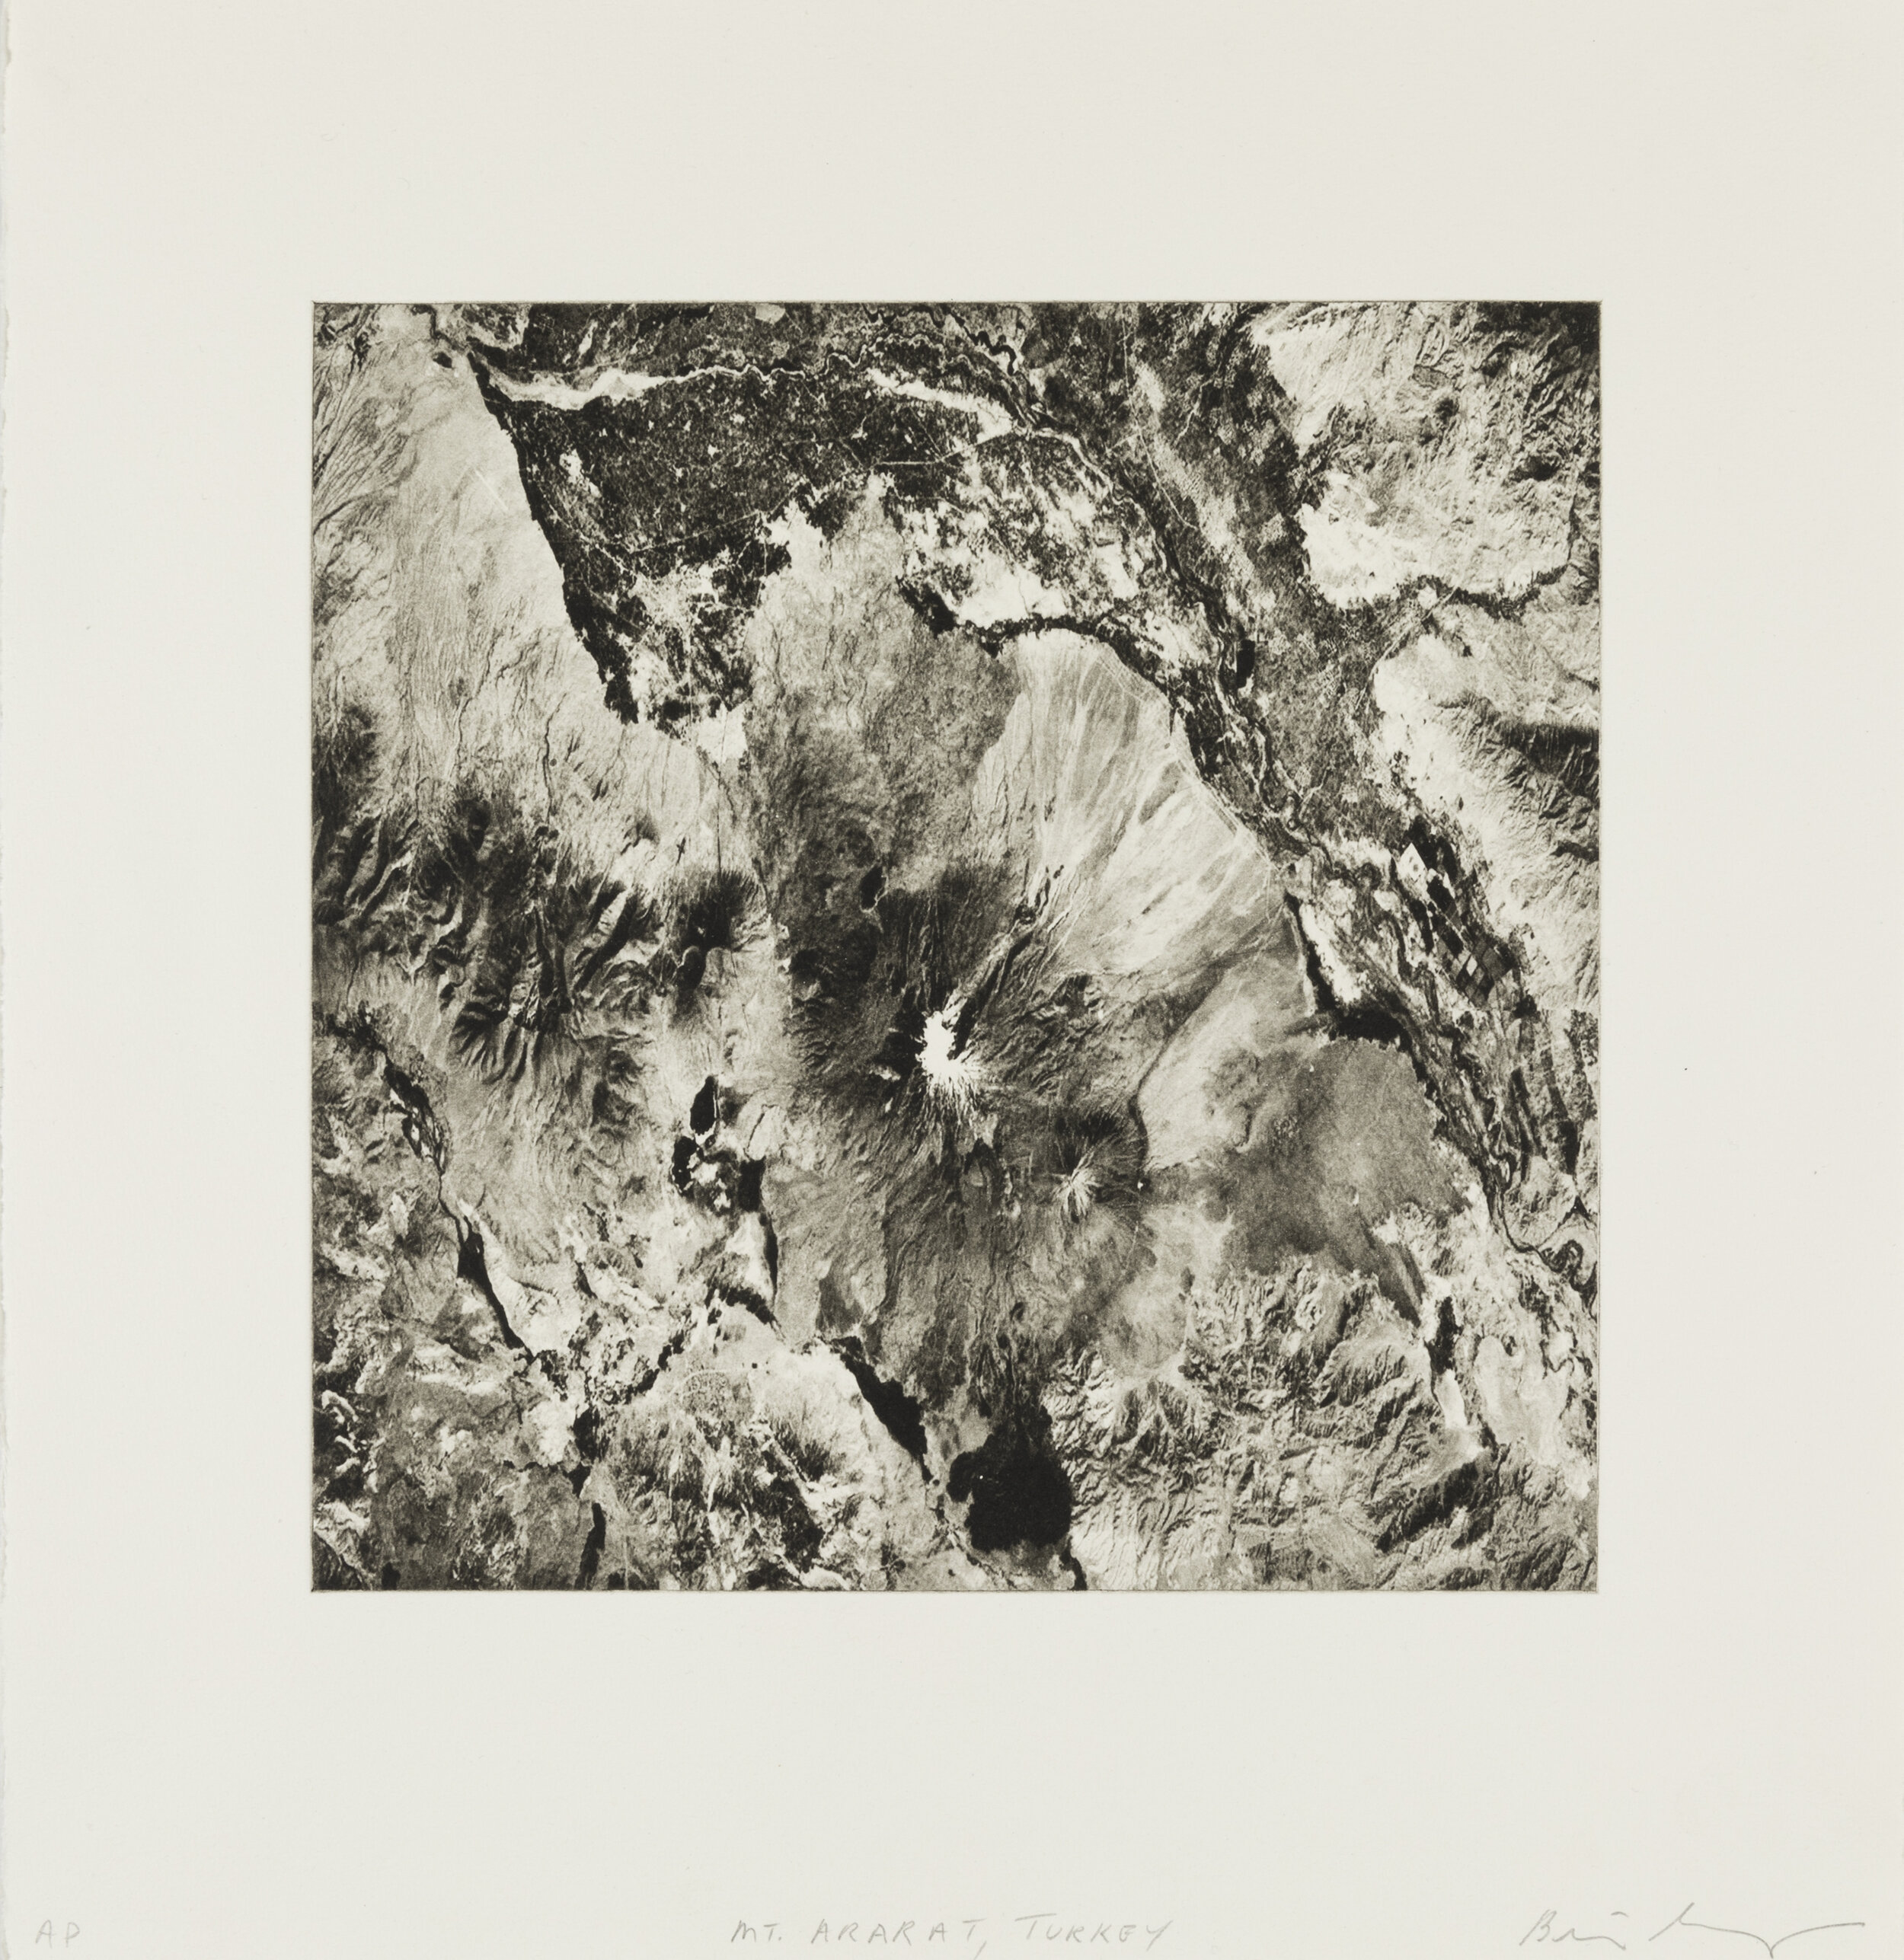    Mount Ararat, Turkey, 2019    Copperplate photogravure etching on cotton rag paper, plate size; 10.6” x 10.6”, paper size; 16” x 15.5”, edition 10  